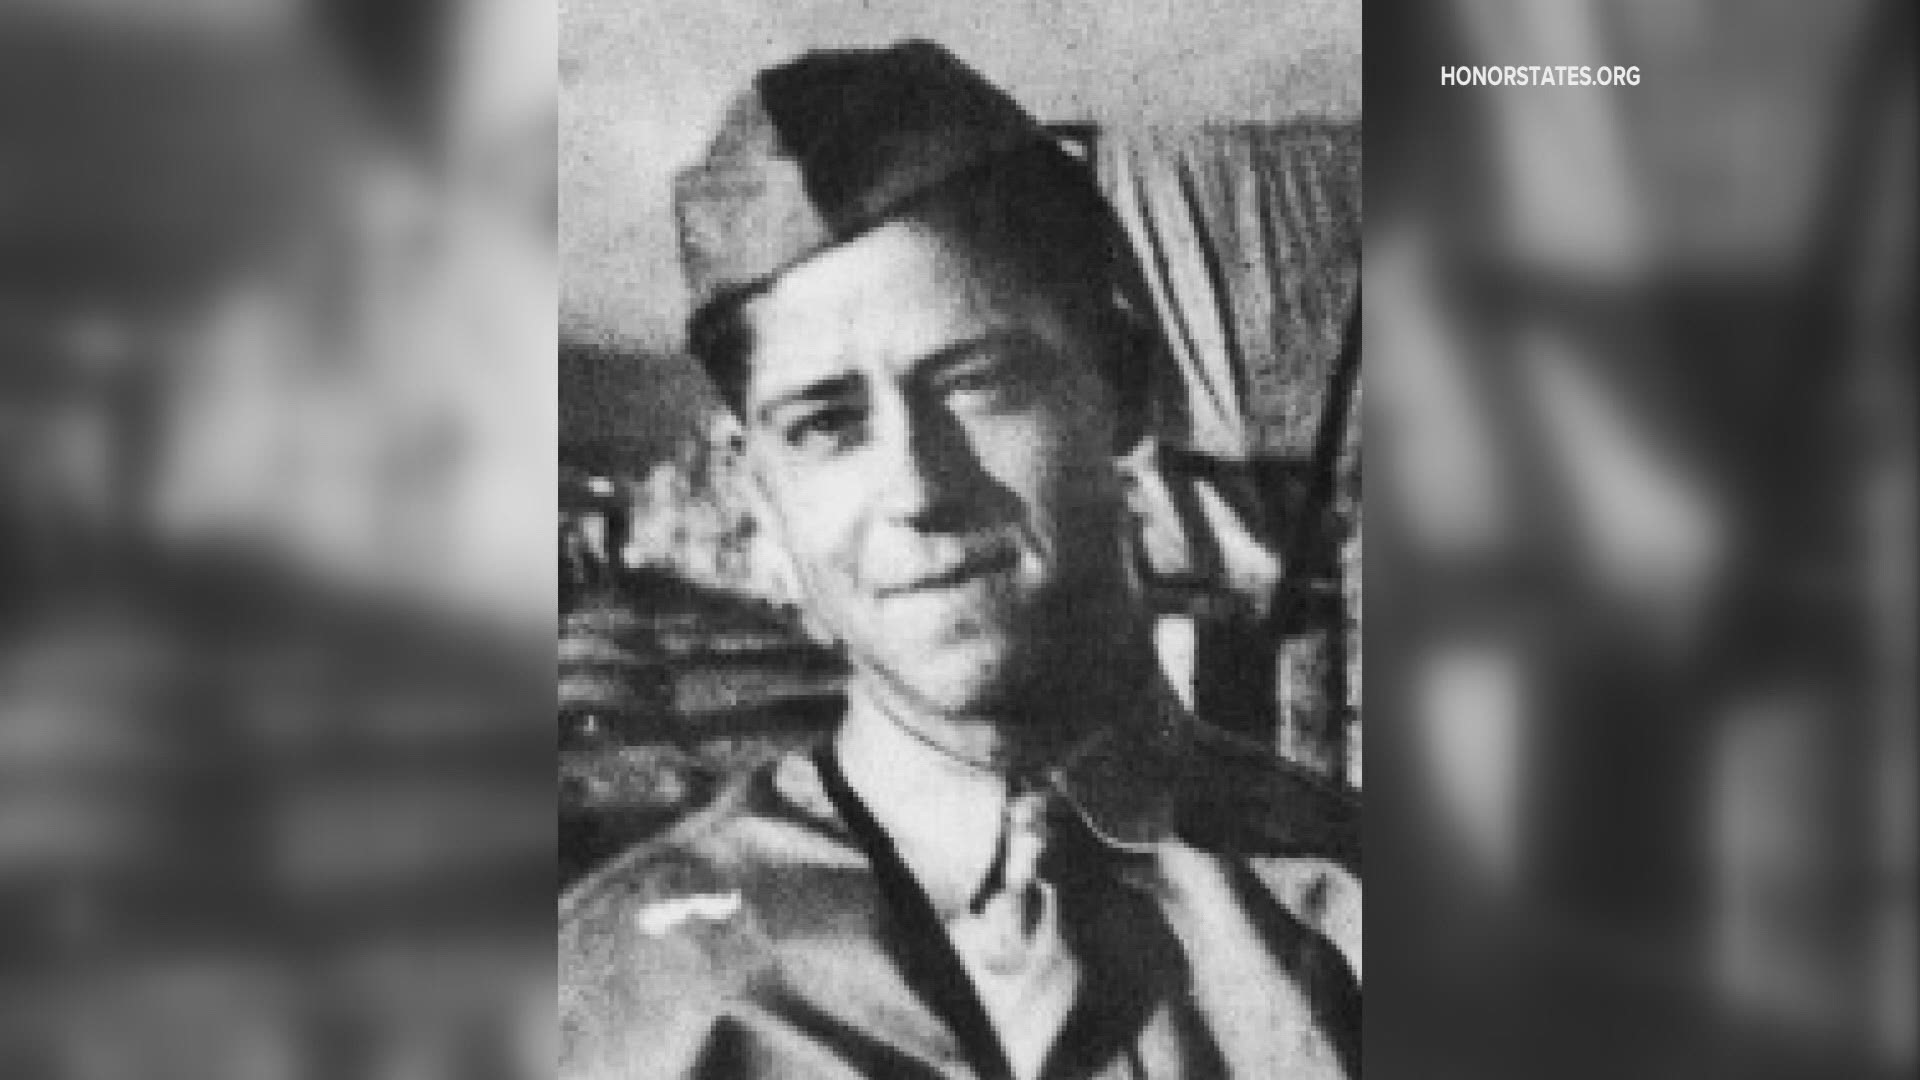 PFC Willard Carleton Orr is the only Bangor native killed in the Pearl Harbor attack on Dec. 7, 1941.